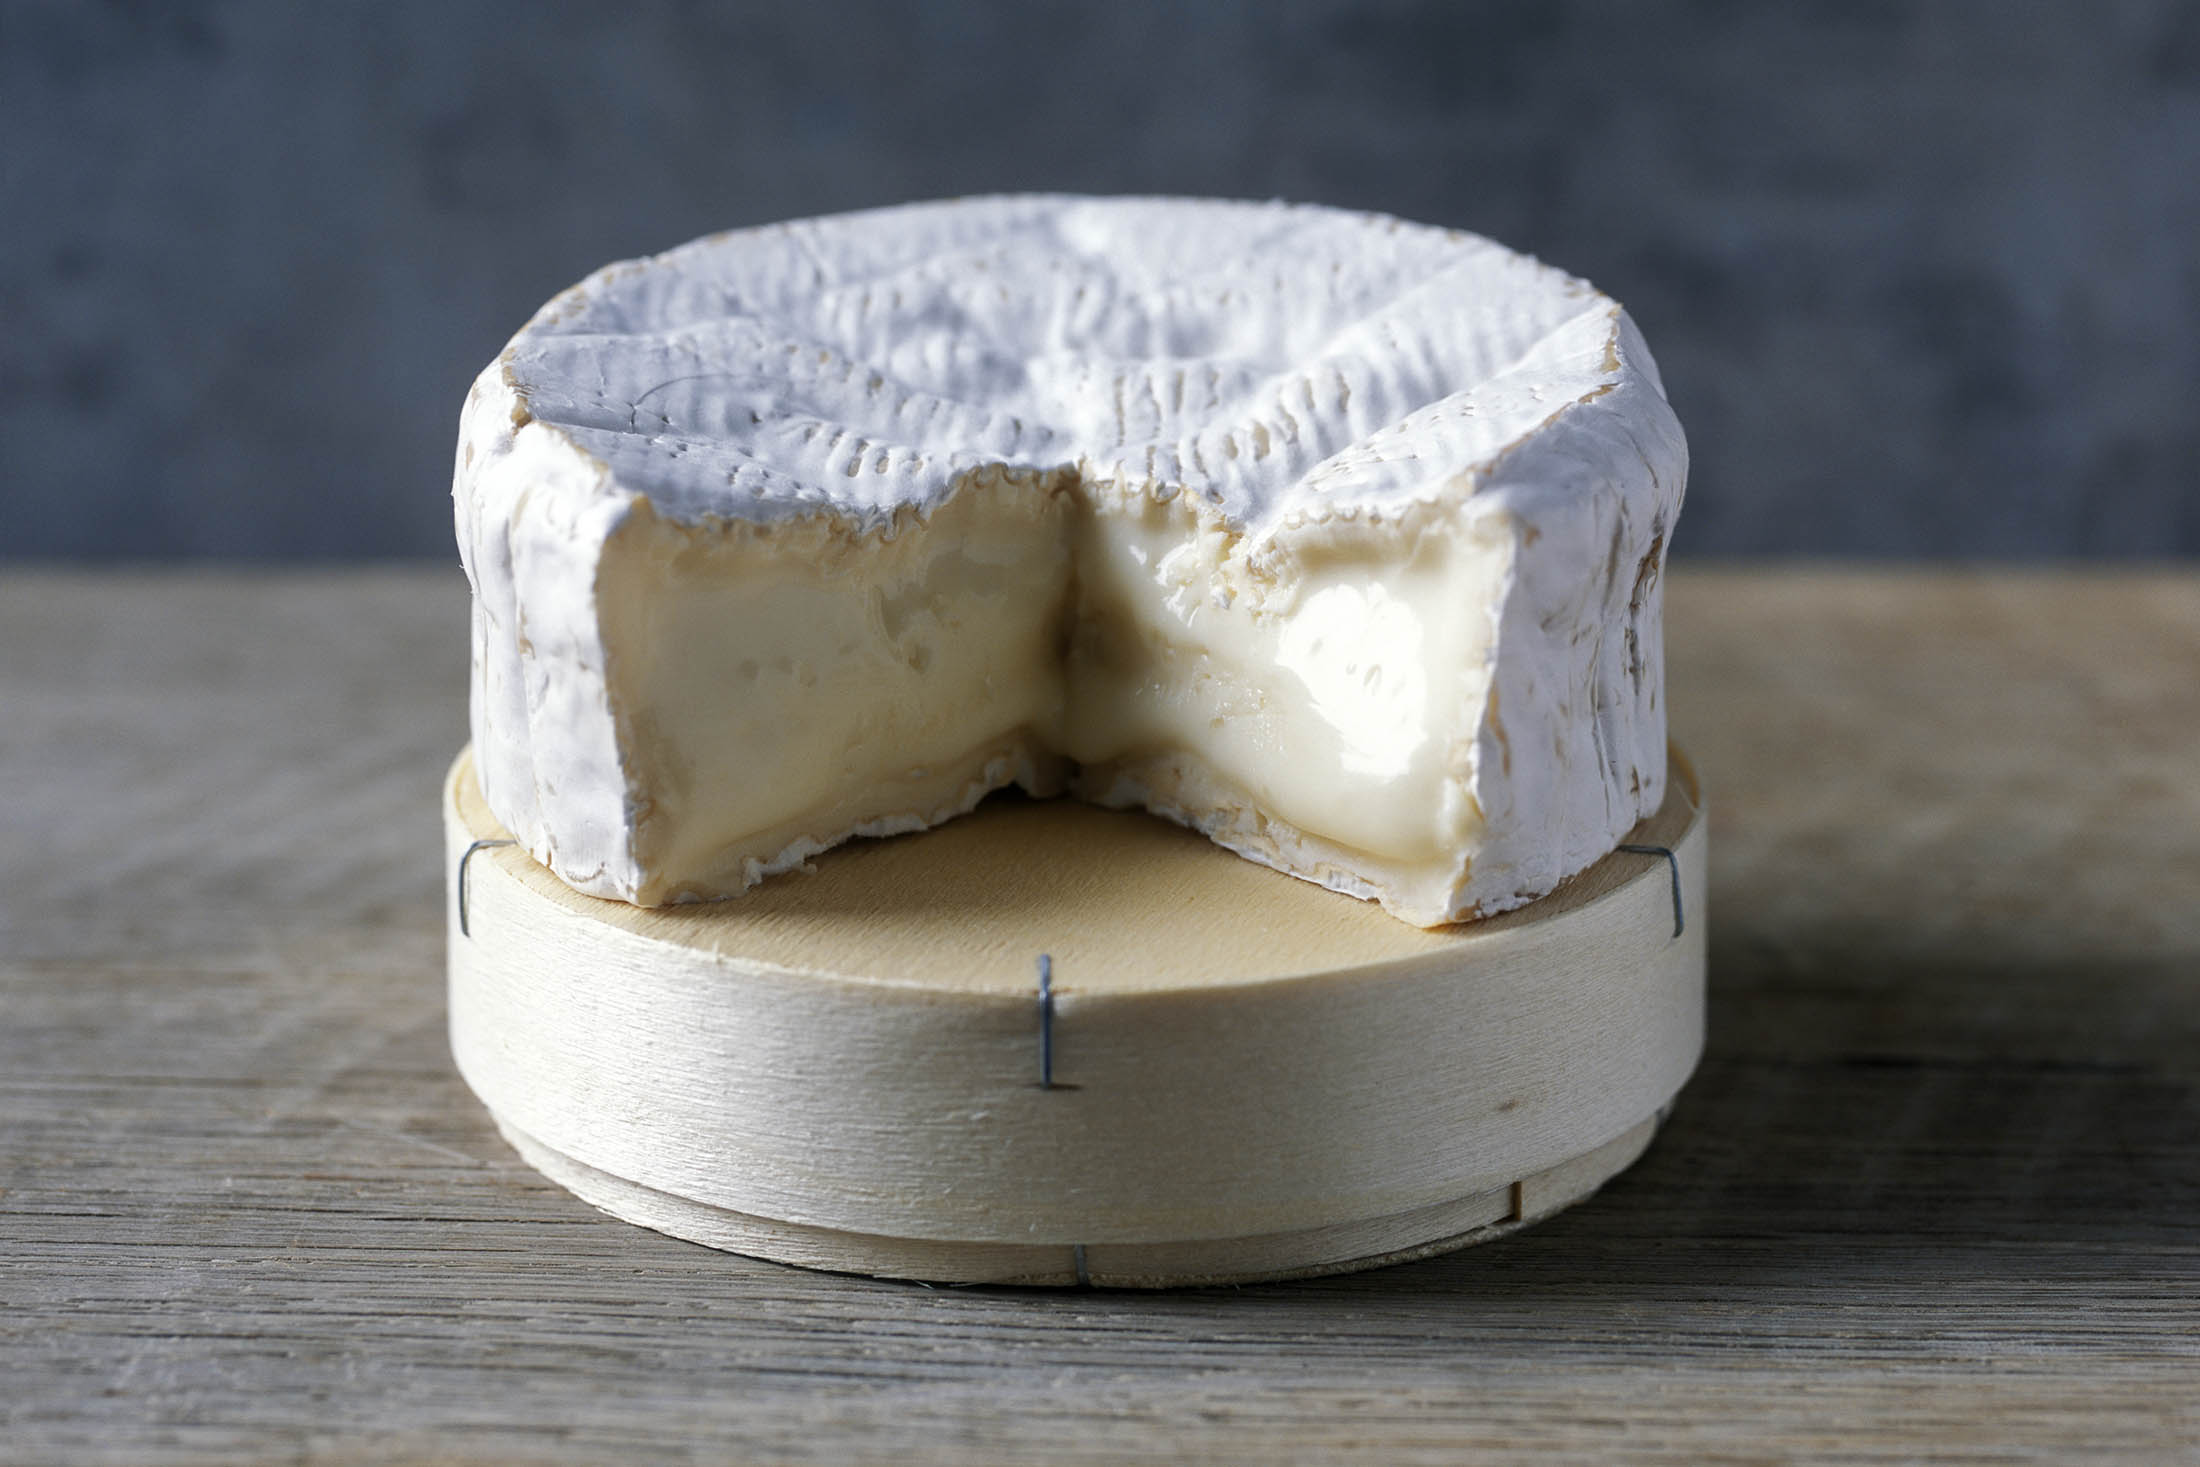 Camembert Cheese Might Be Going Extinct - Bloomberg